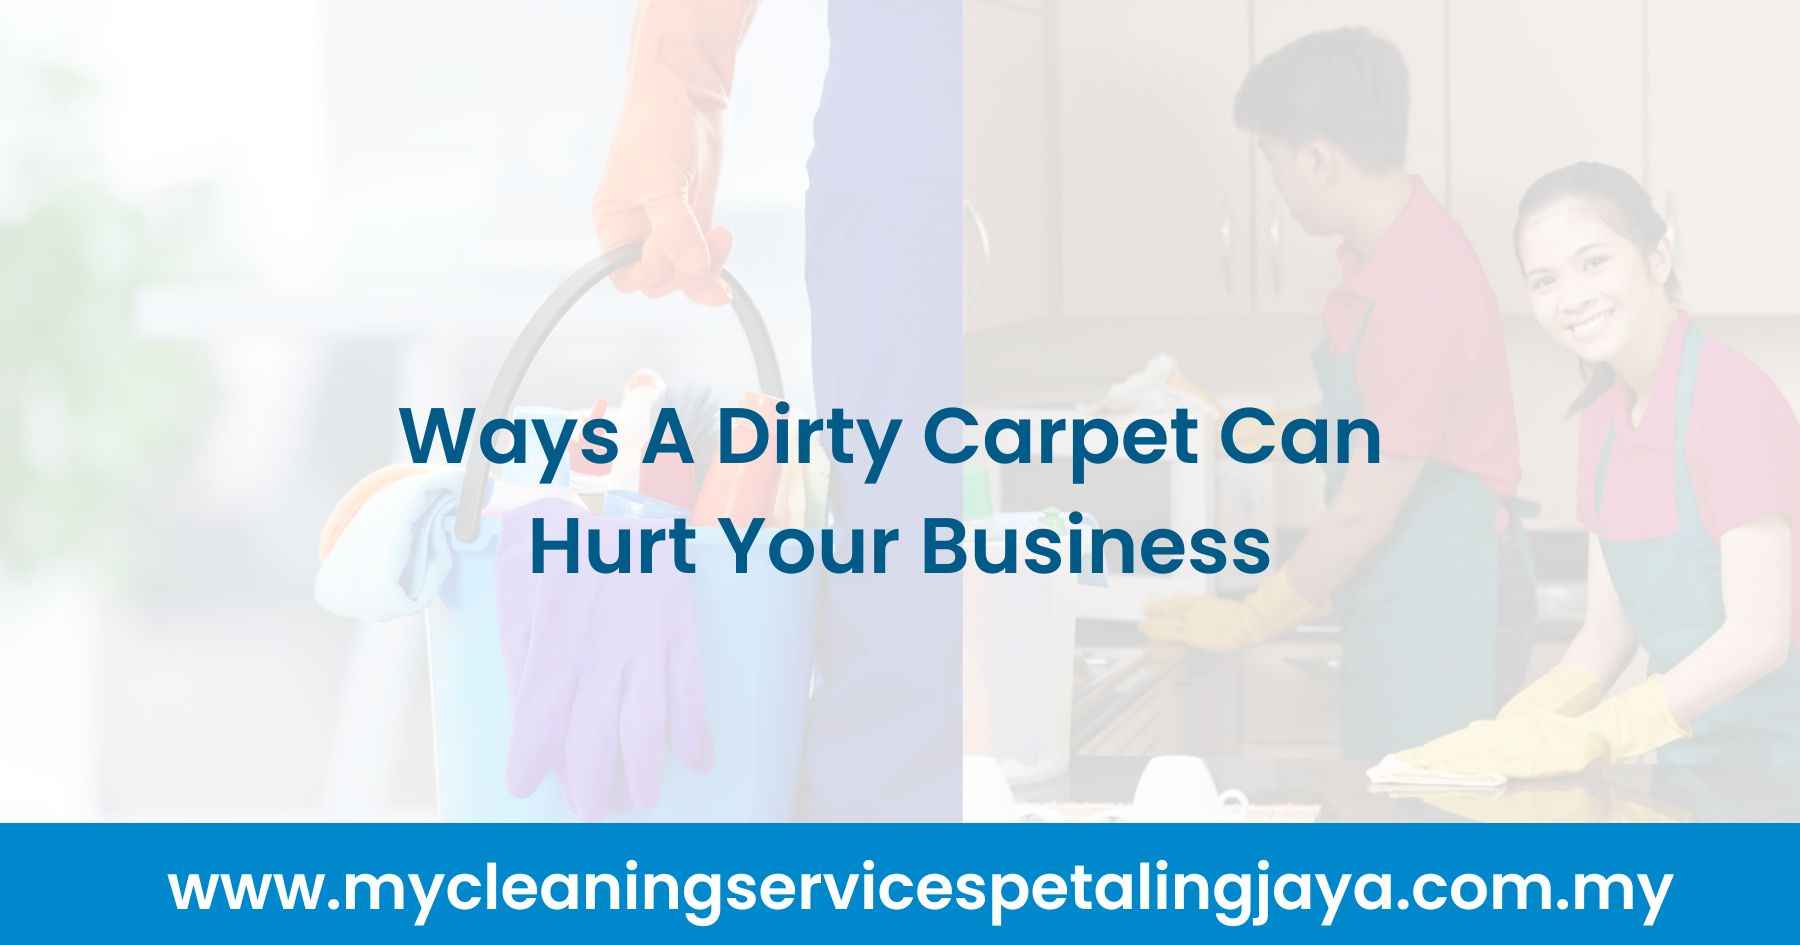 Ways A Dirty Carpet Can Hurt Your Business